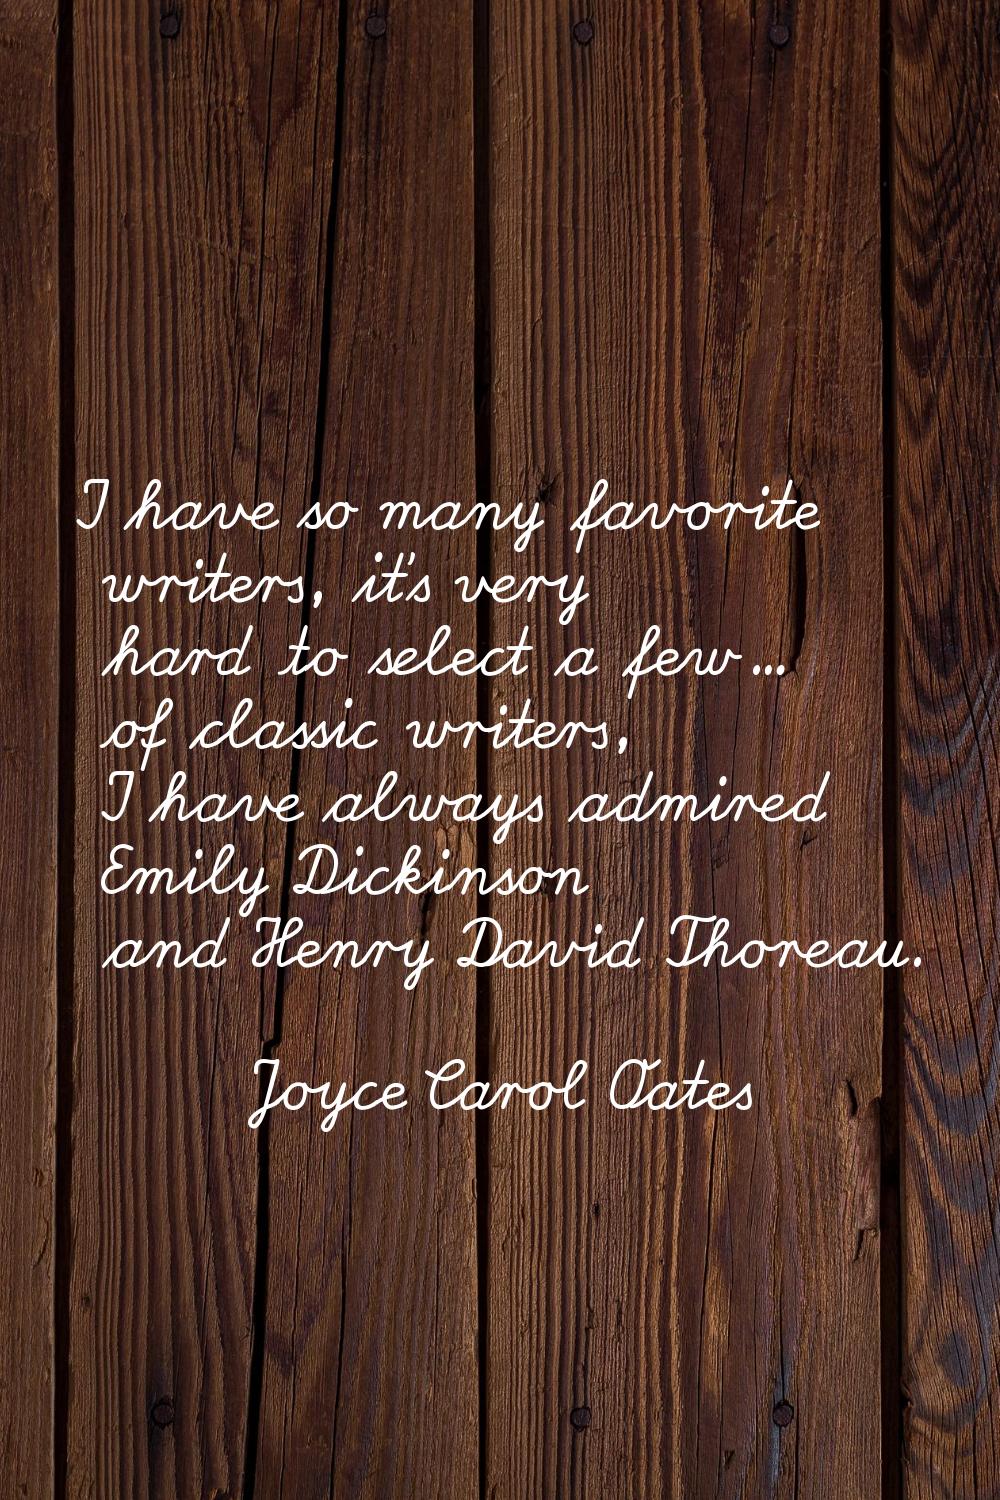 I have so many favorite writers, it's very hard to select a few... of classic writers, I have alway